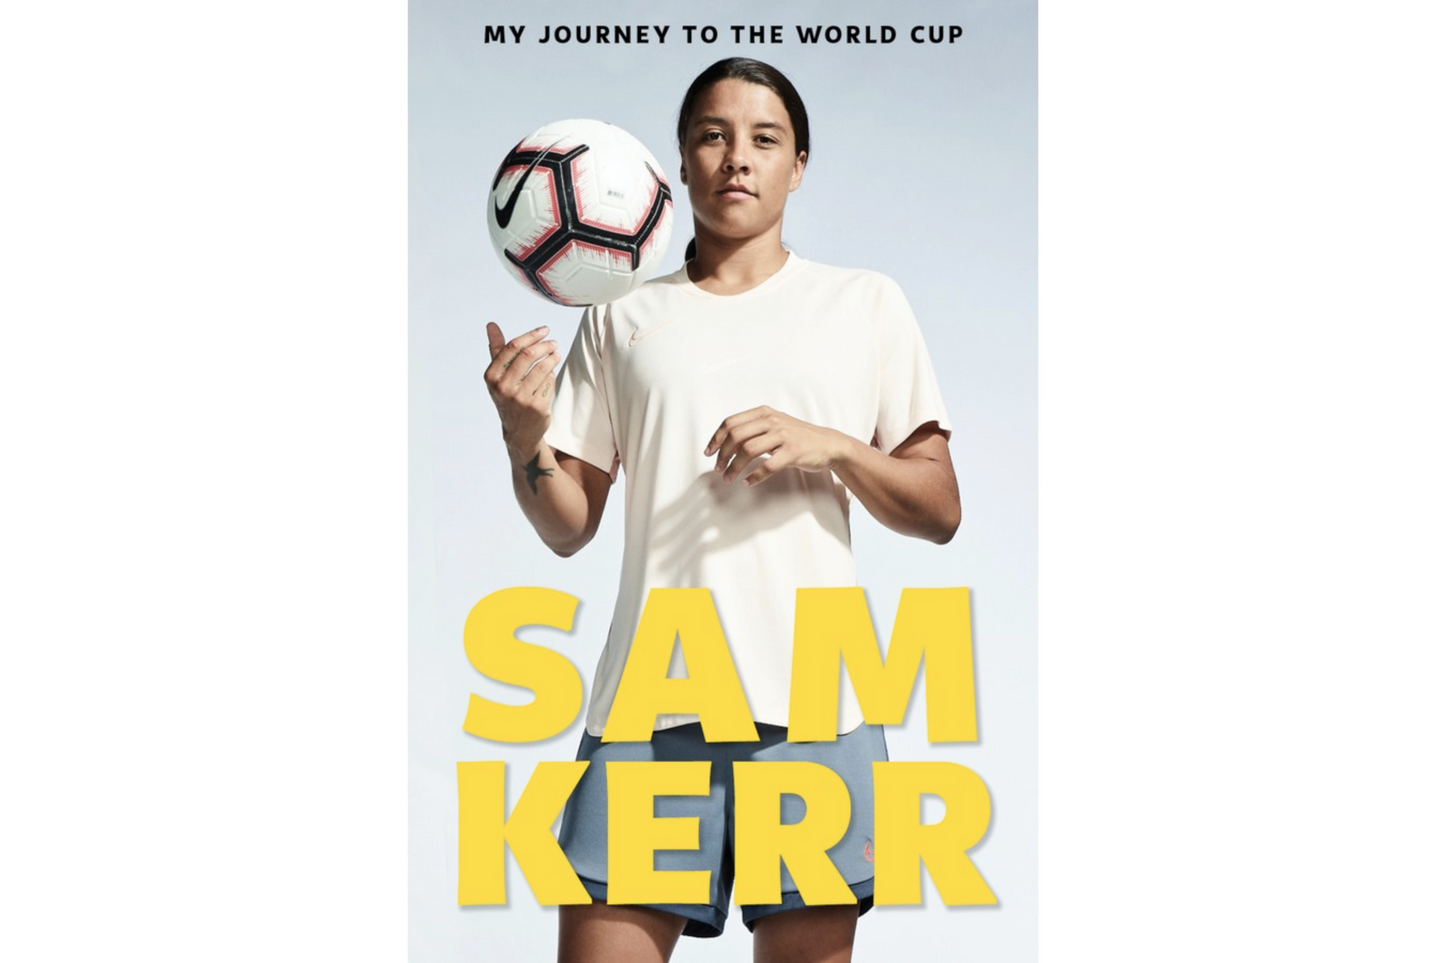 My Journey to the World Cup (Sam Kerr)